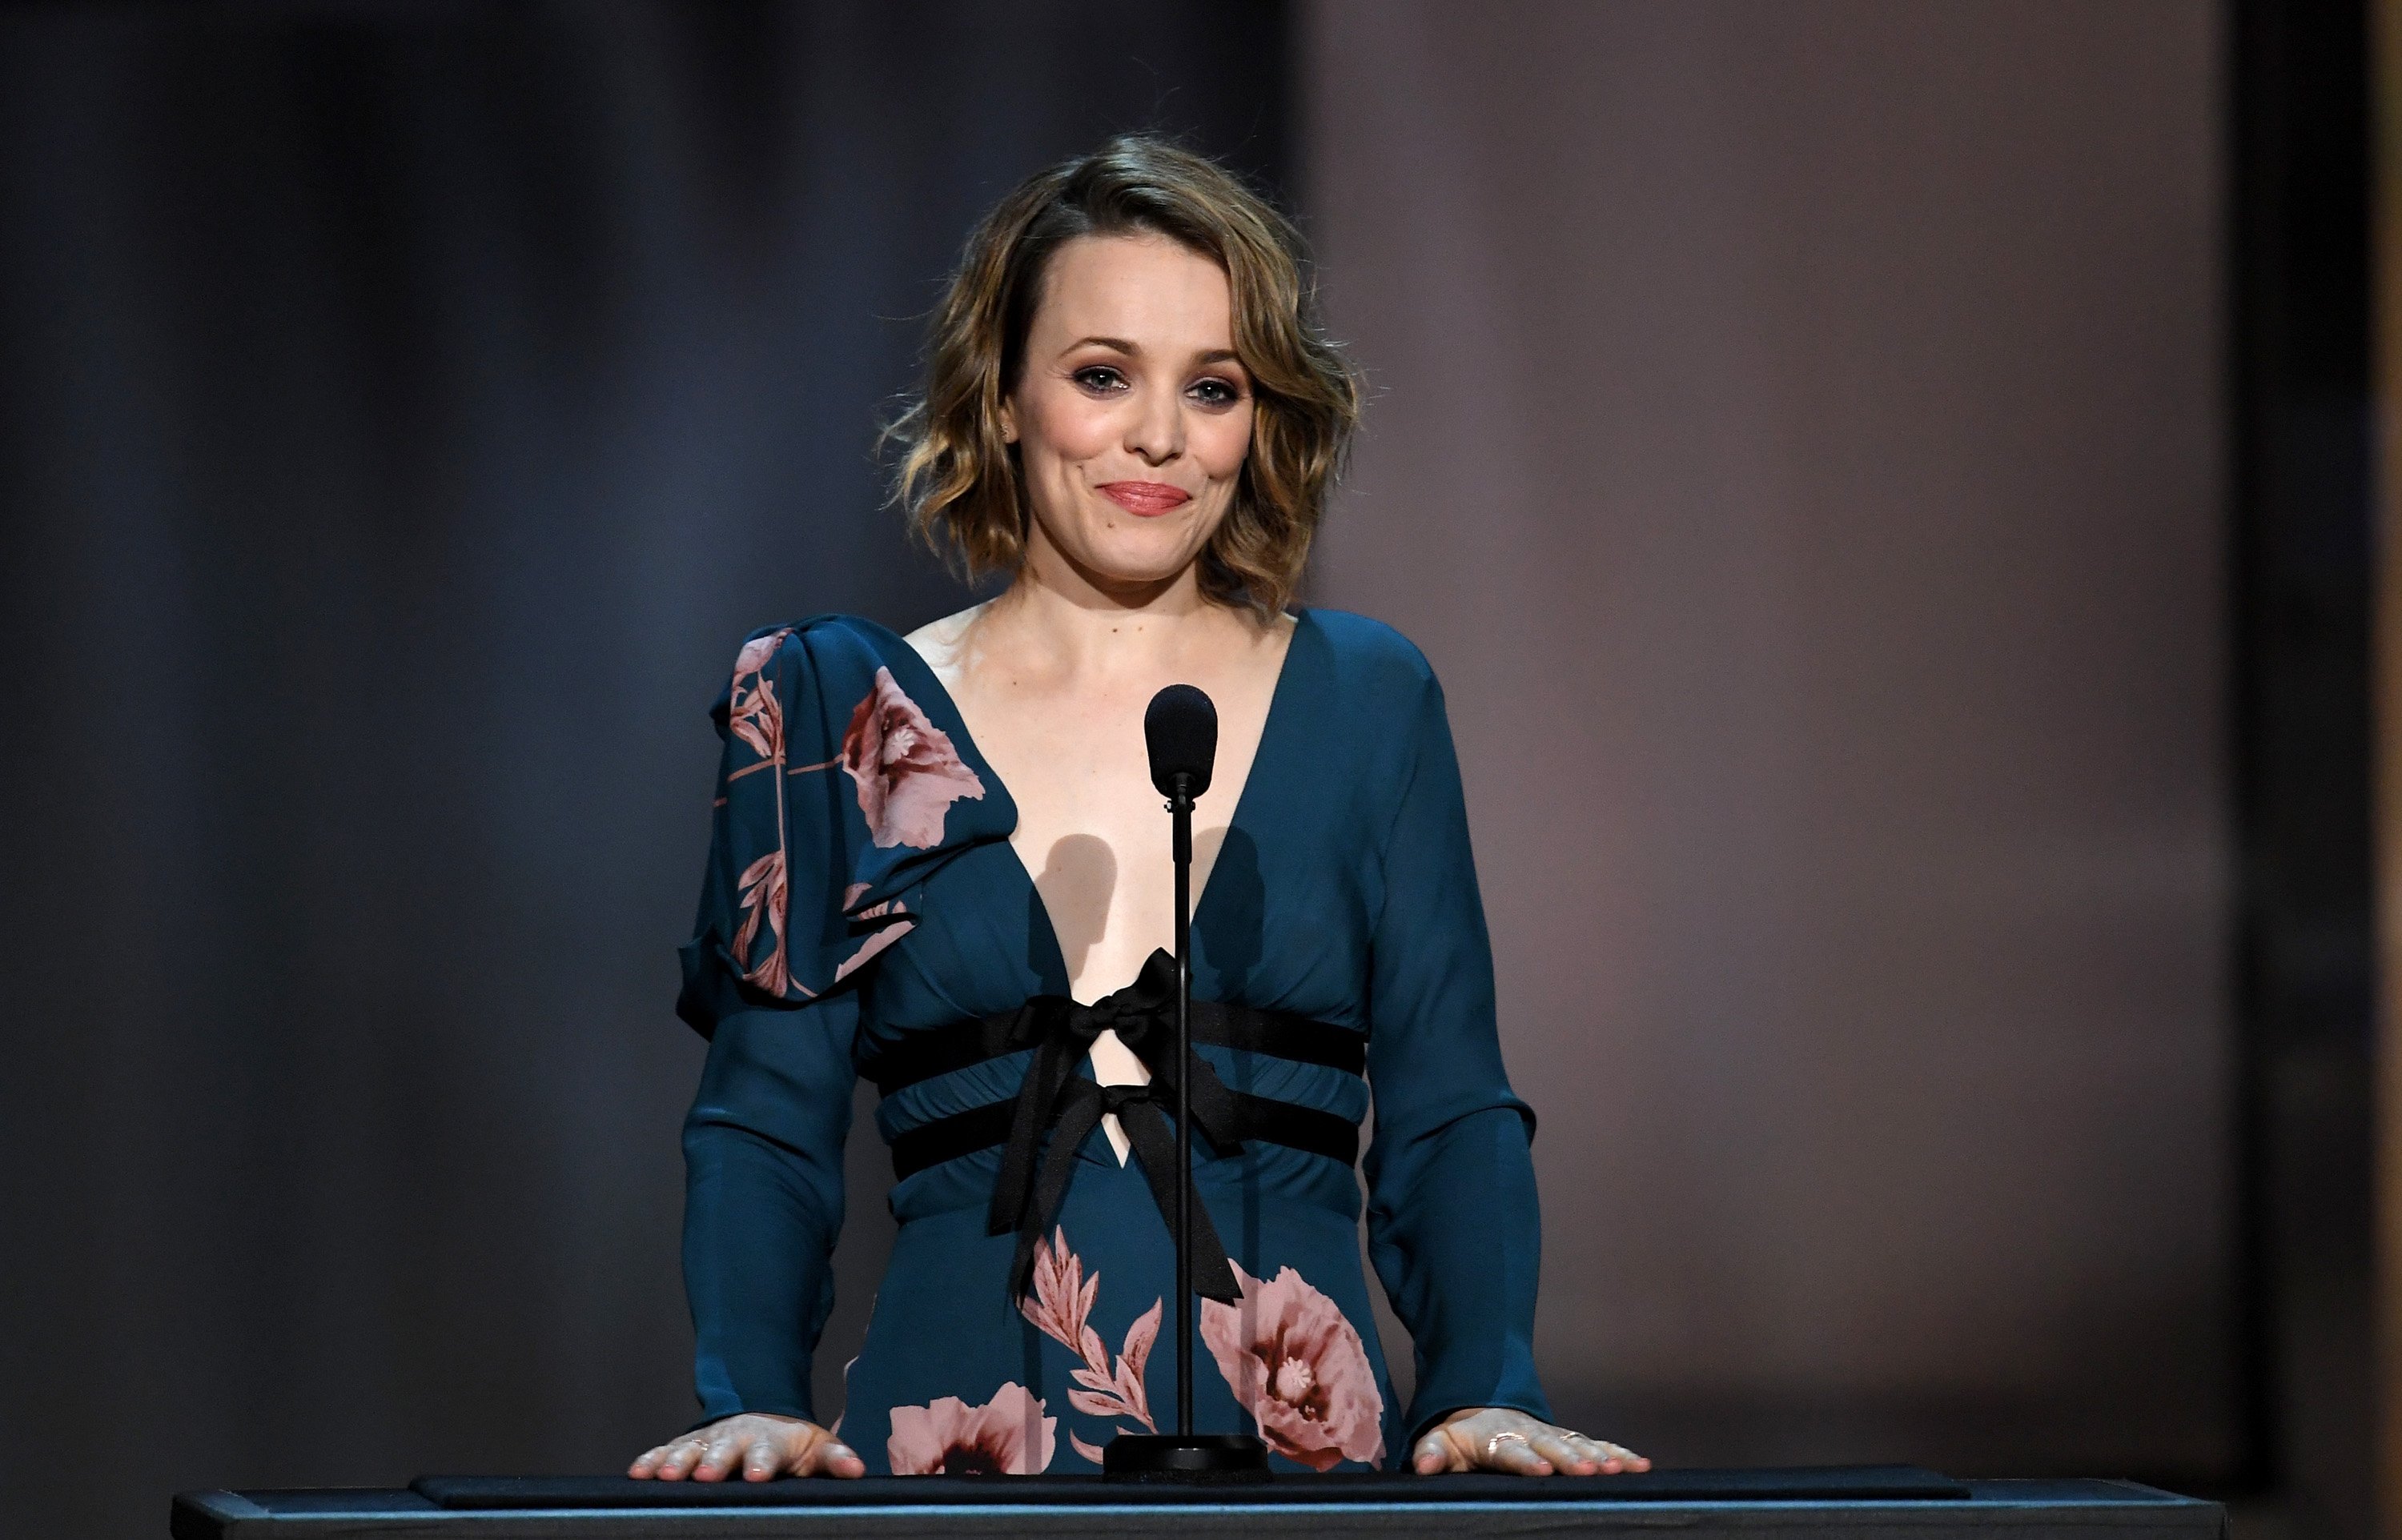 Rachel McAdams speaks onstage at the American Film Institute's 45th Life Achievement Award Gala Tribute to Diane Keaton on June 8, 2017, in Hollywood, California. | Source: Getty Images